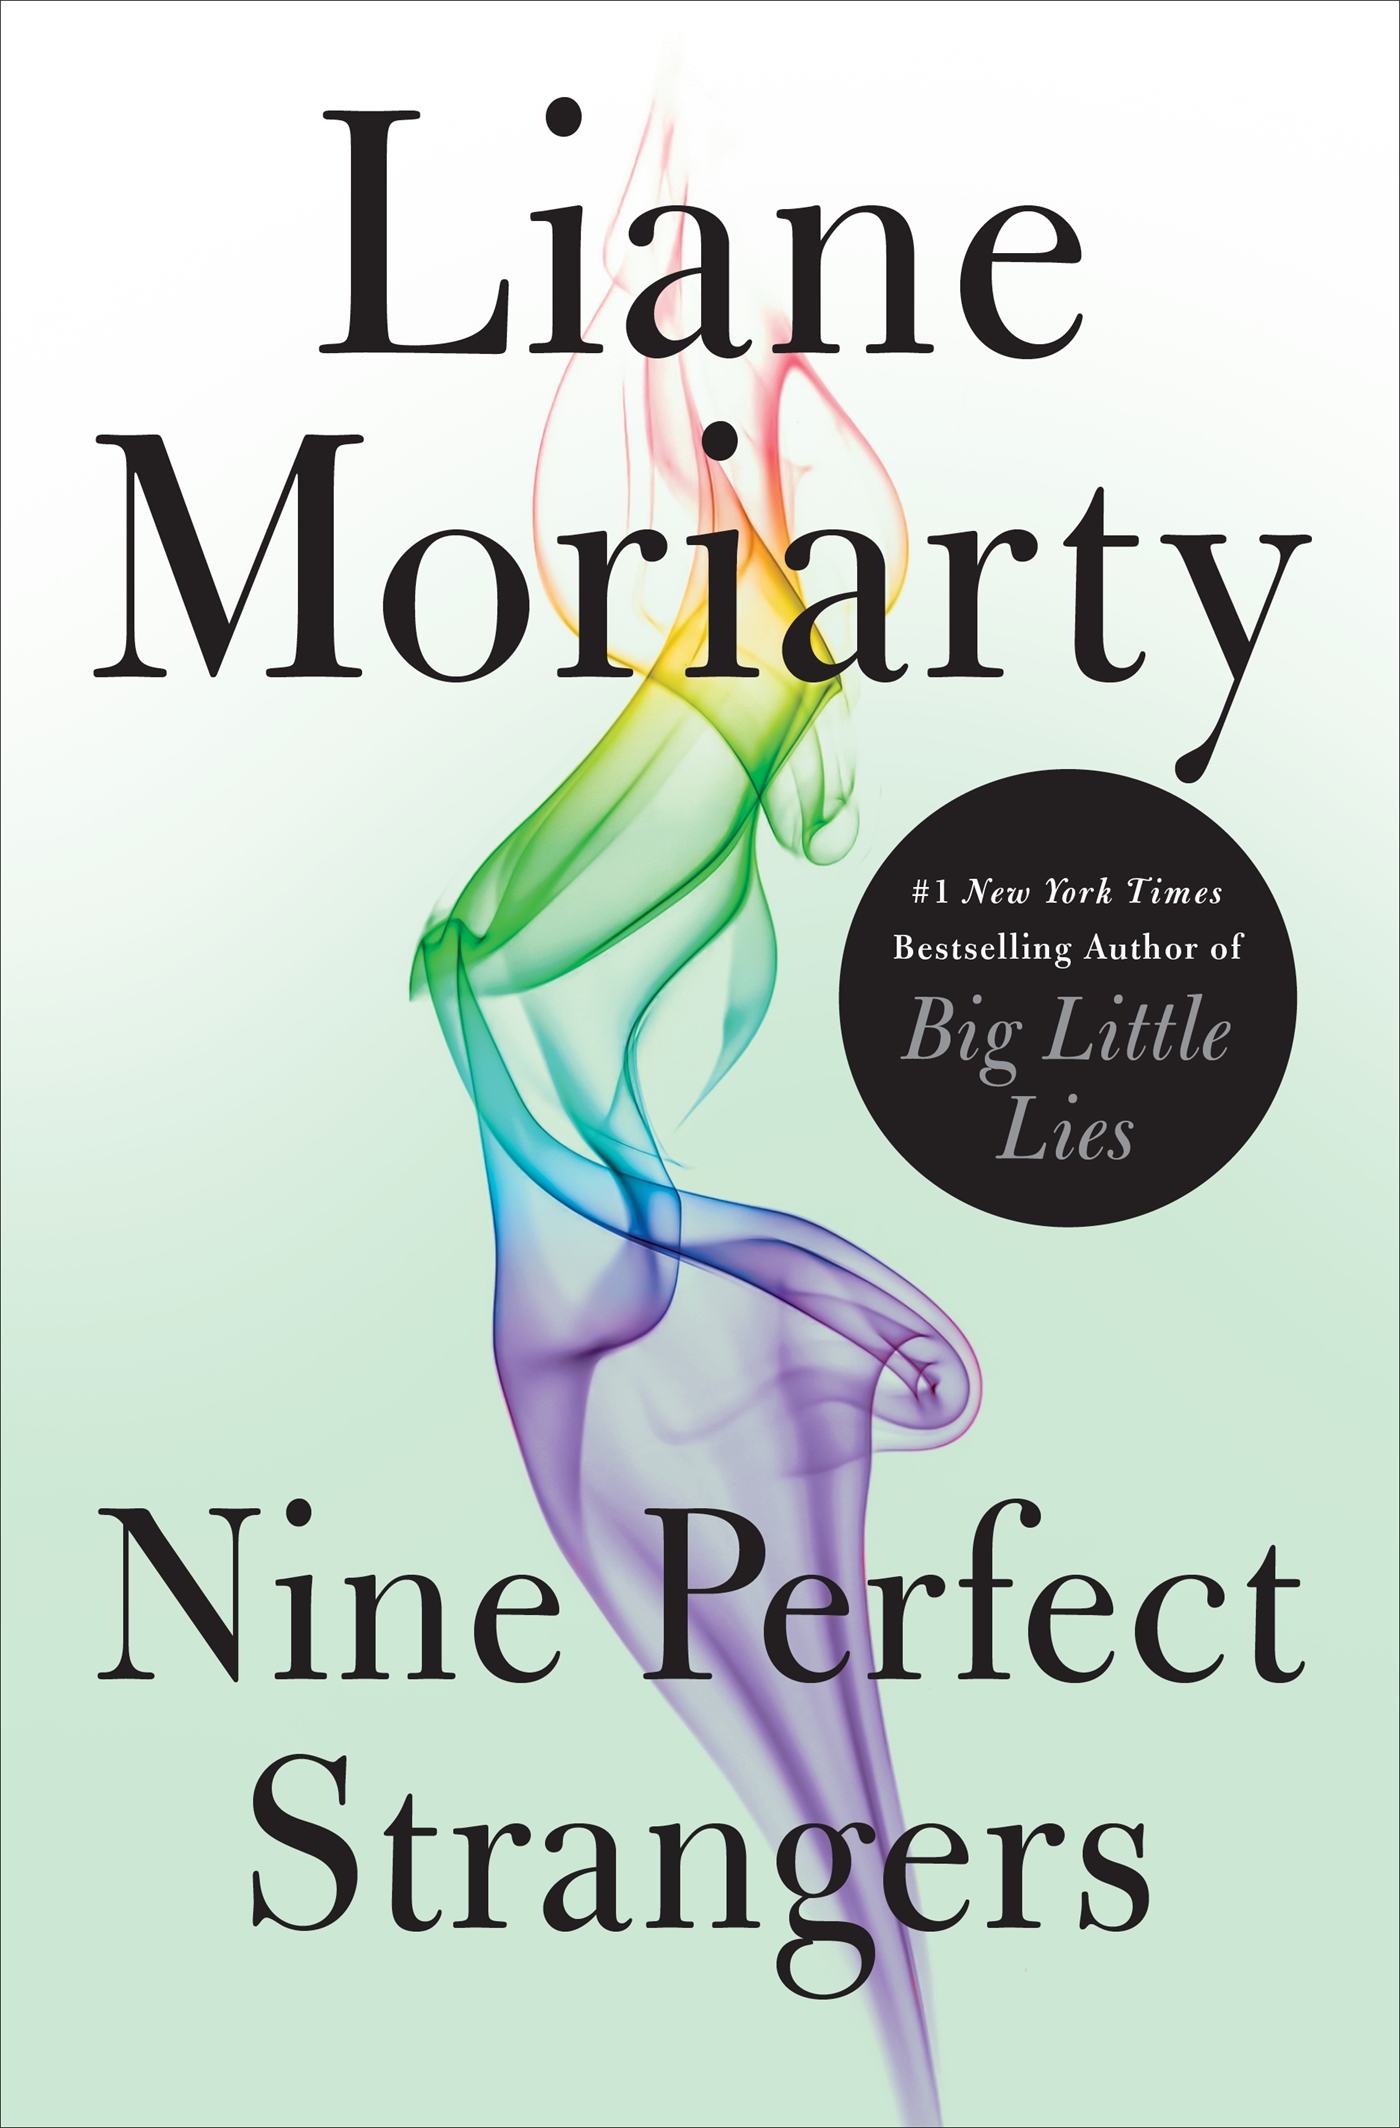 Liane Moriarty US book cover for "Nine Perfect Strangers"